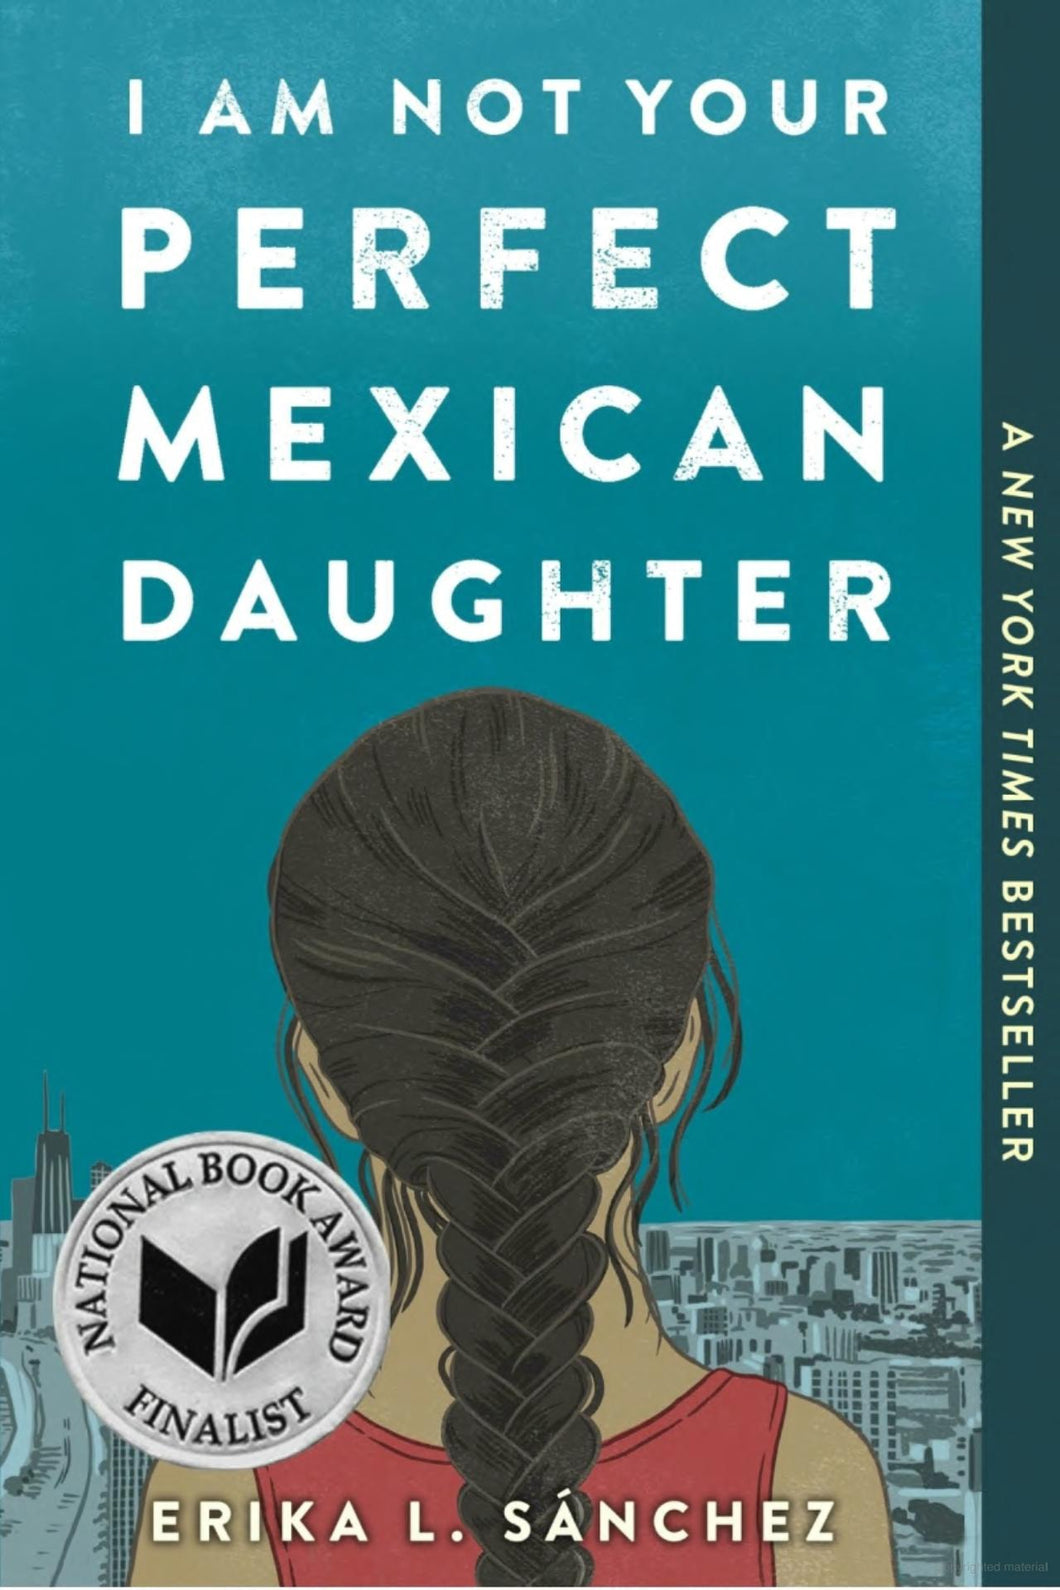 I Am Not Your Perfect Mexican Daughter (Paperback) - Indie Indie Bang! Bang!